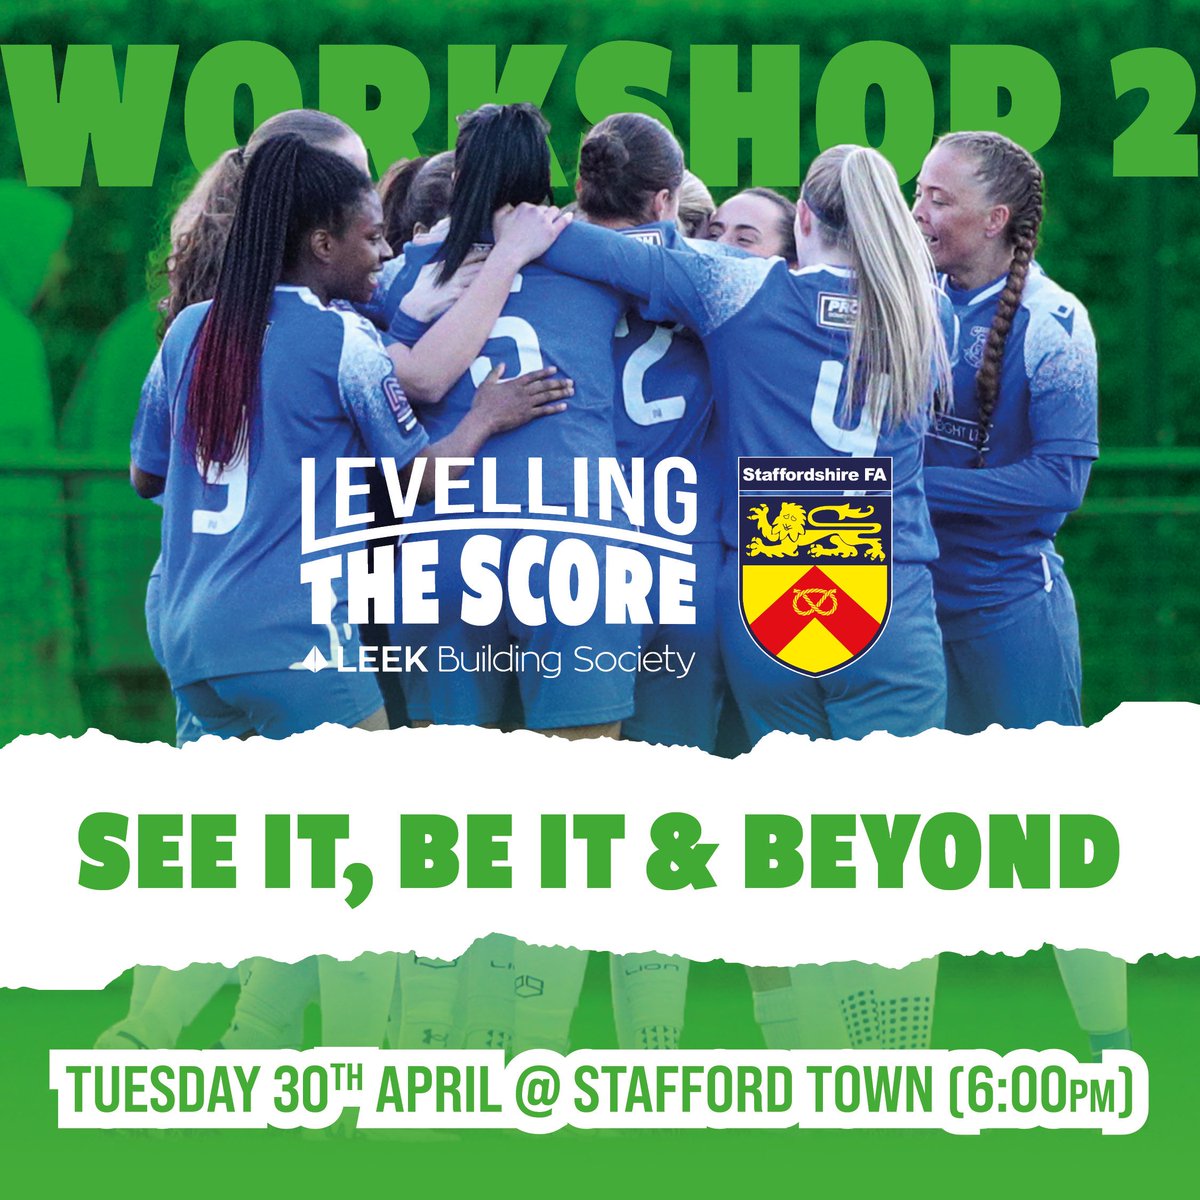 Join us for 𝗟𝗲𝘃𝗲𝗹𝗹𝗶𝗻𝗴 𝗧𝗵𝗲 𝗦𝗰𝗼𝗿𝗲 at the Girls Cup Final ⚽ The workshop focuses on the importance of positive female role models for young female players. 📲 buff.ly/3waYAf5 #LevellingTheScore | @LeekBuildSoc